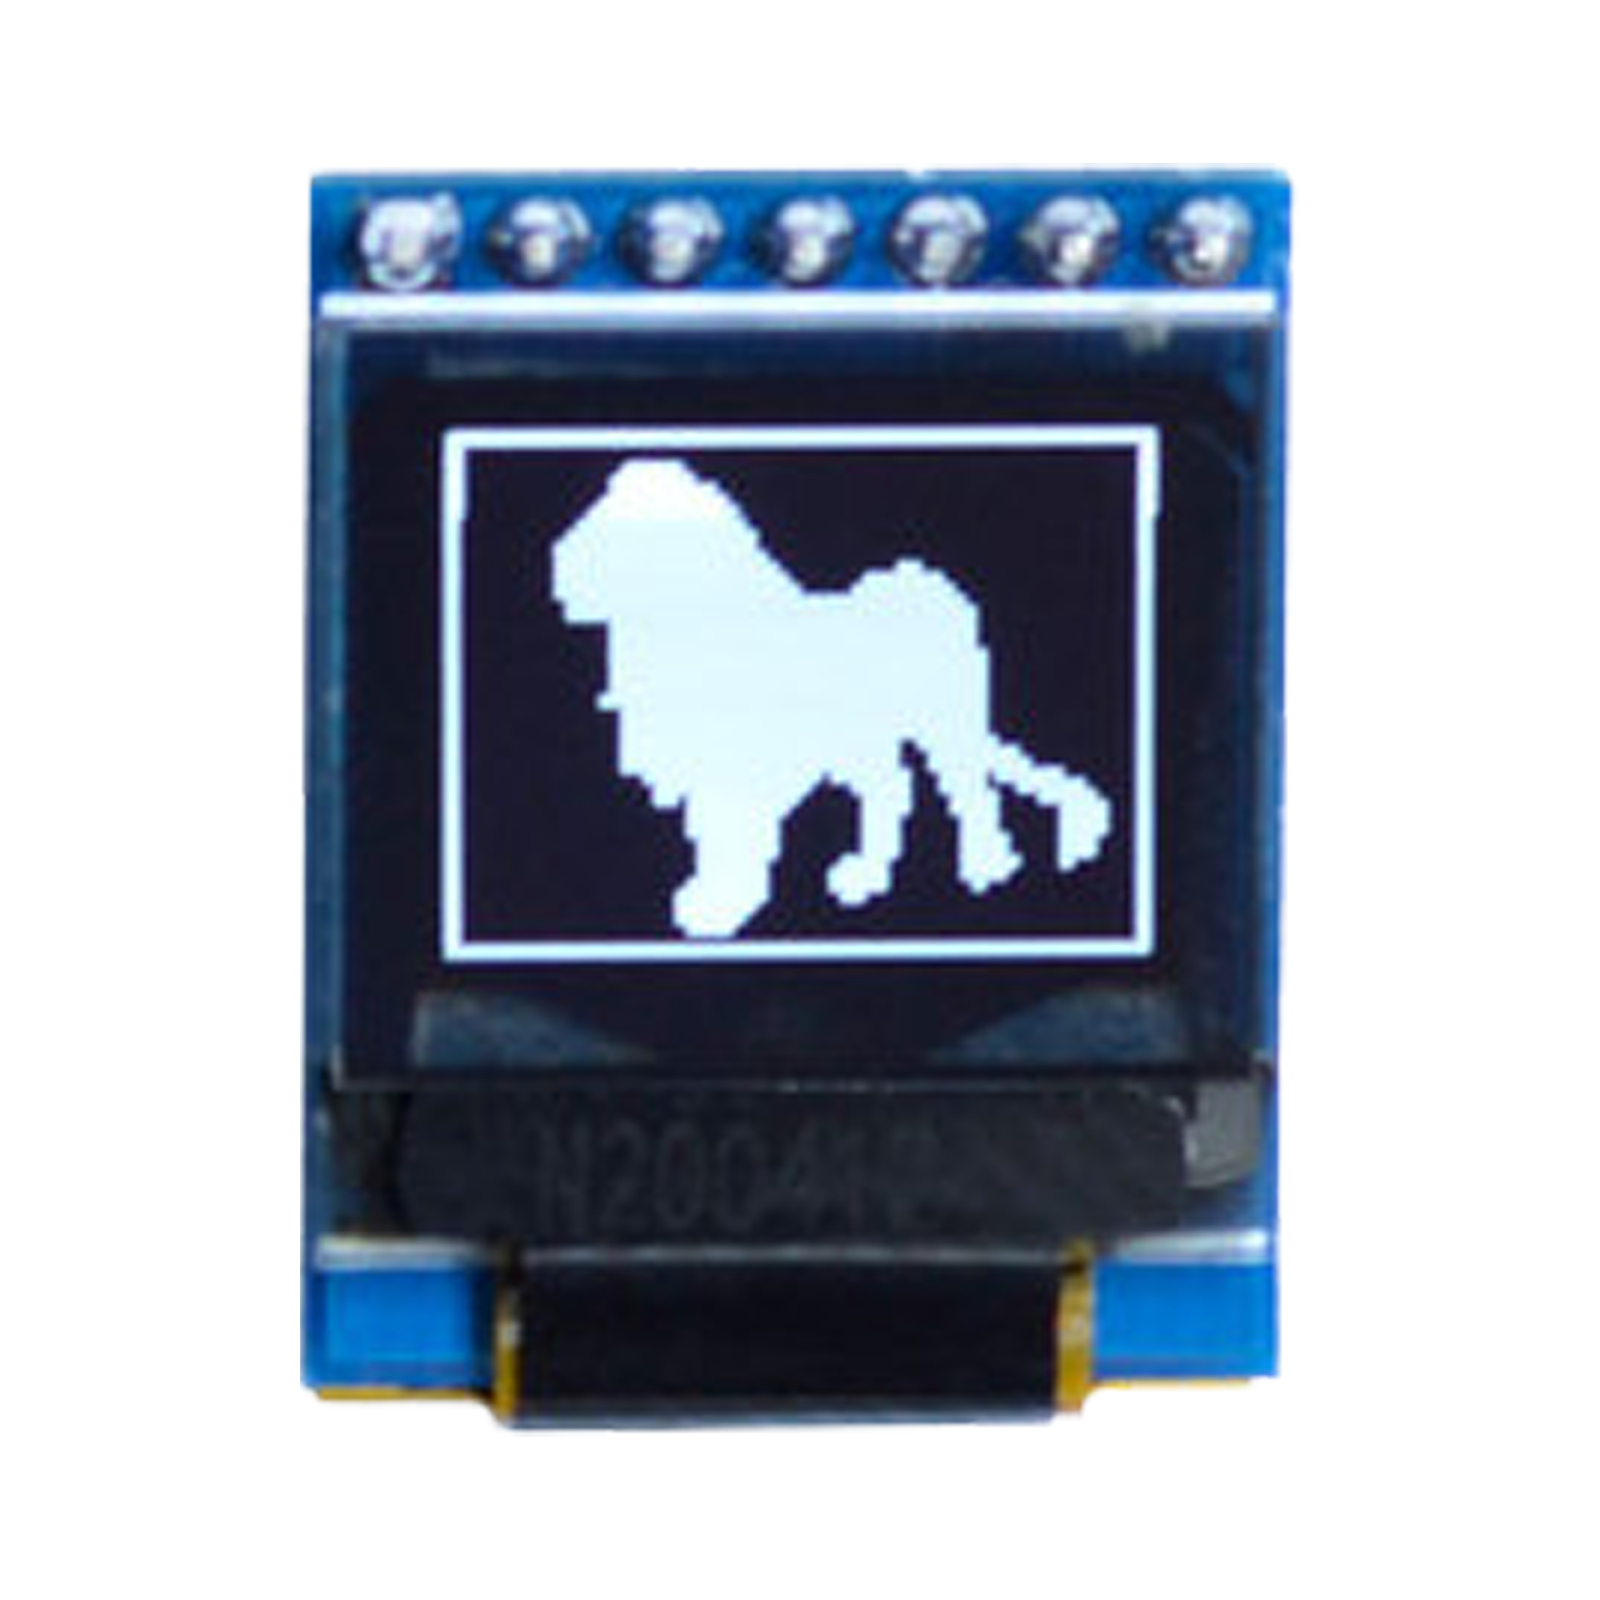 64x48 graphic OLED display module showing a lion pattern